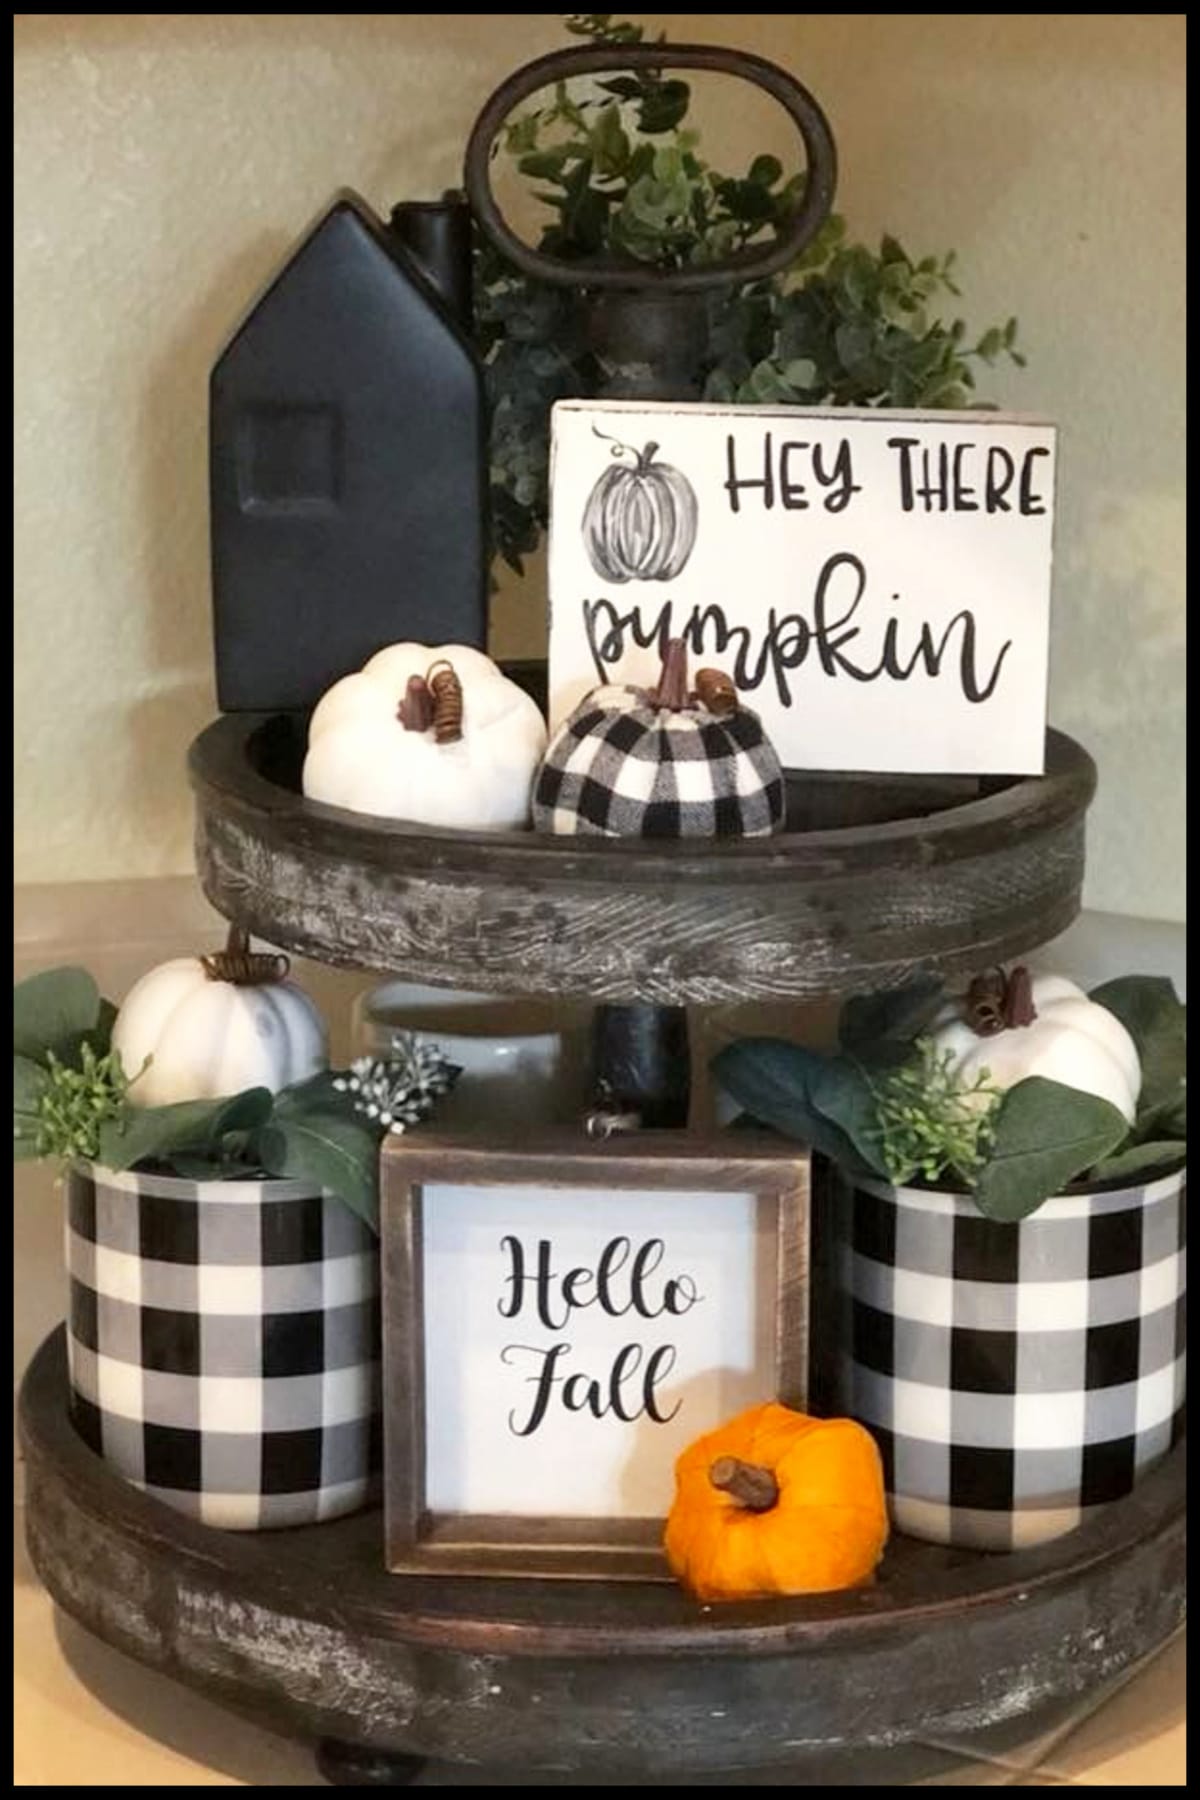 tiered tray decor ideas for Fall / Autumn - wooden tray decoration ideas